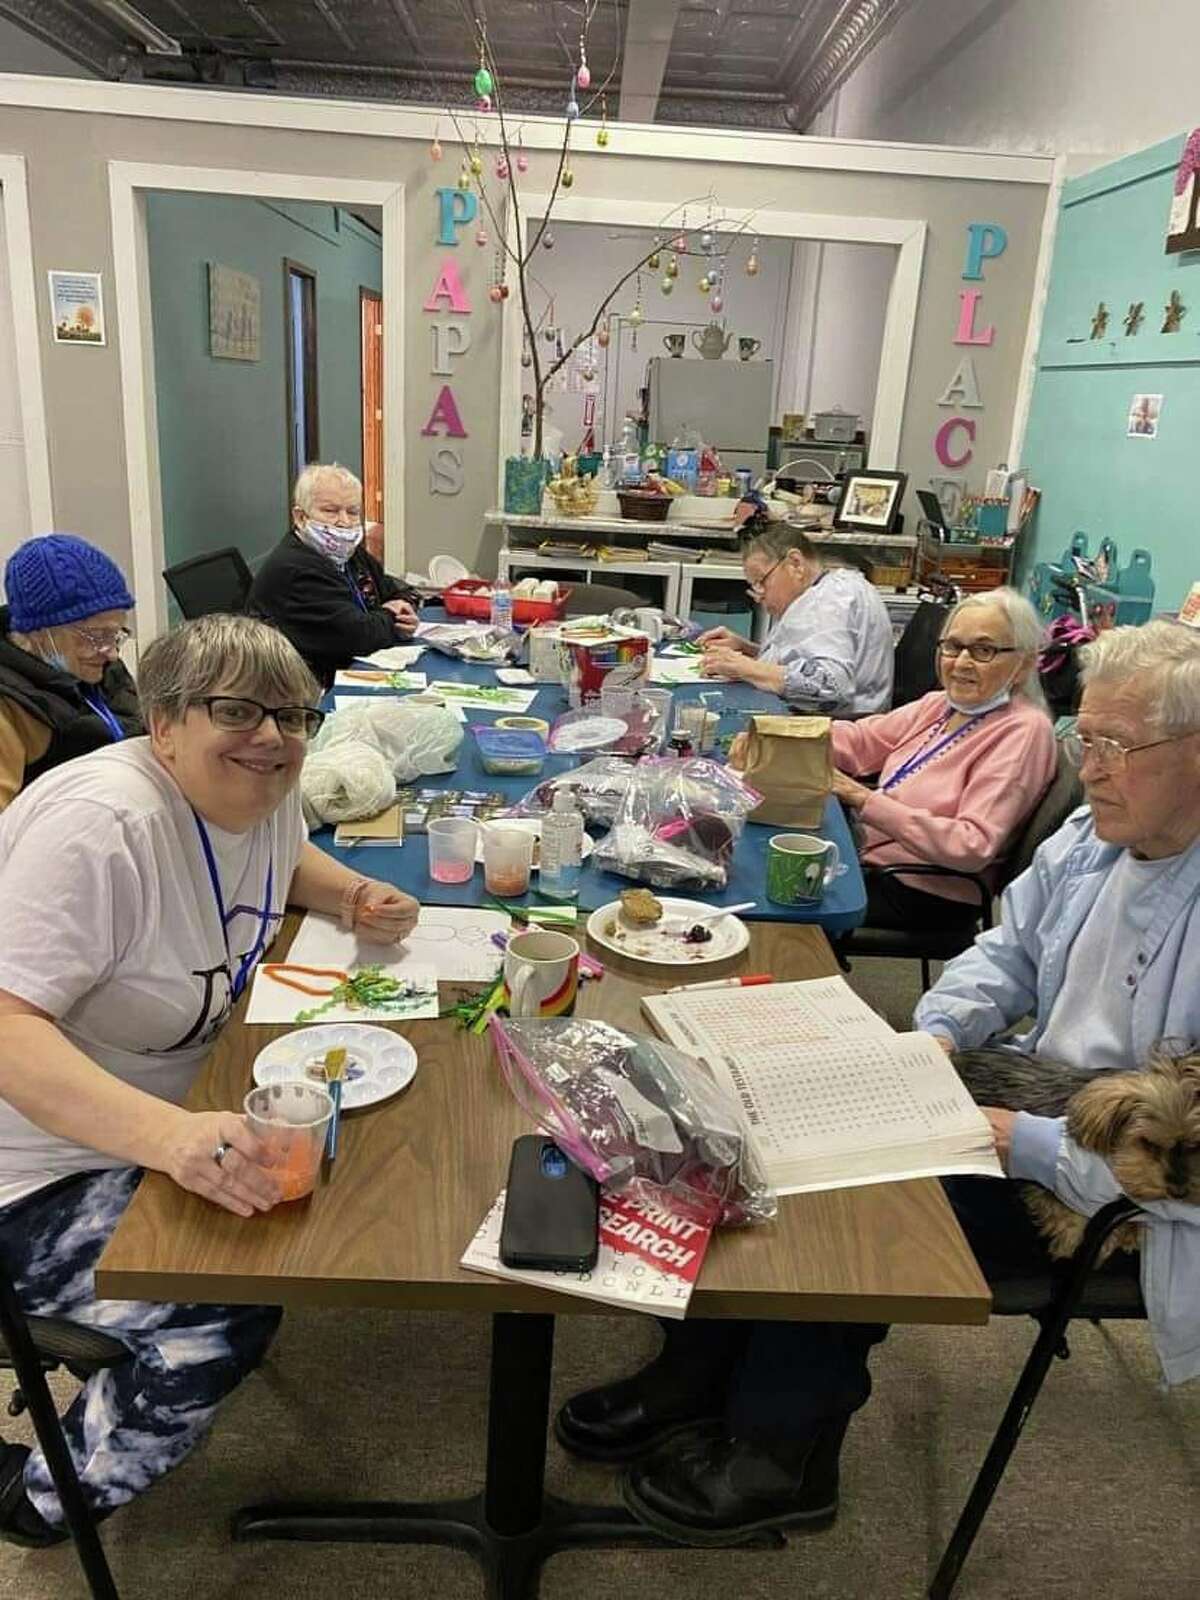 Papa’s Place in Reed City originally opened in 2018 under the ownership of Nicole Haney and has been working to be as adaptable for its seniors as possible and has created several care services for clients specific needs.